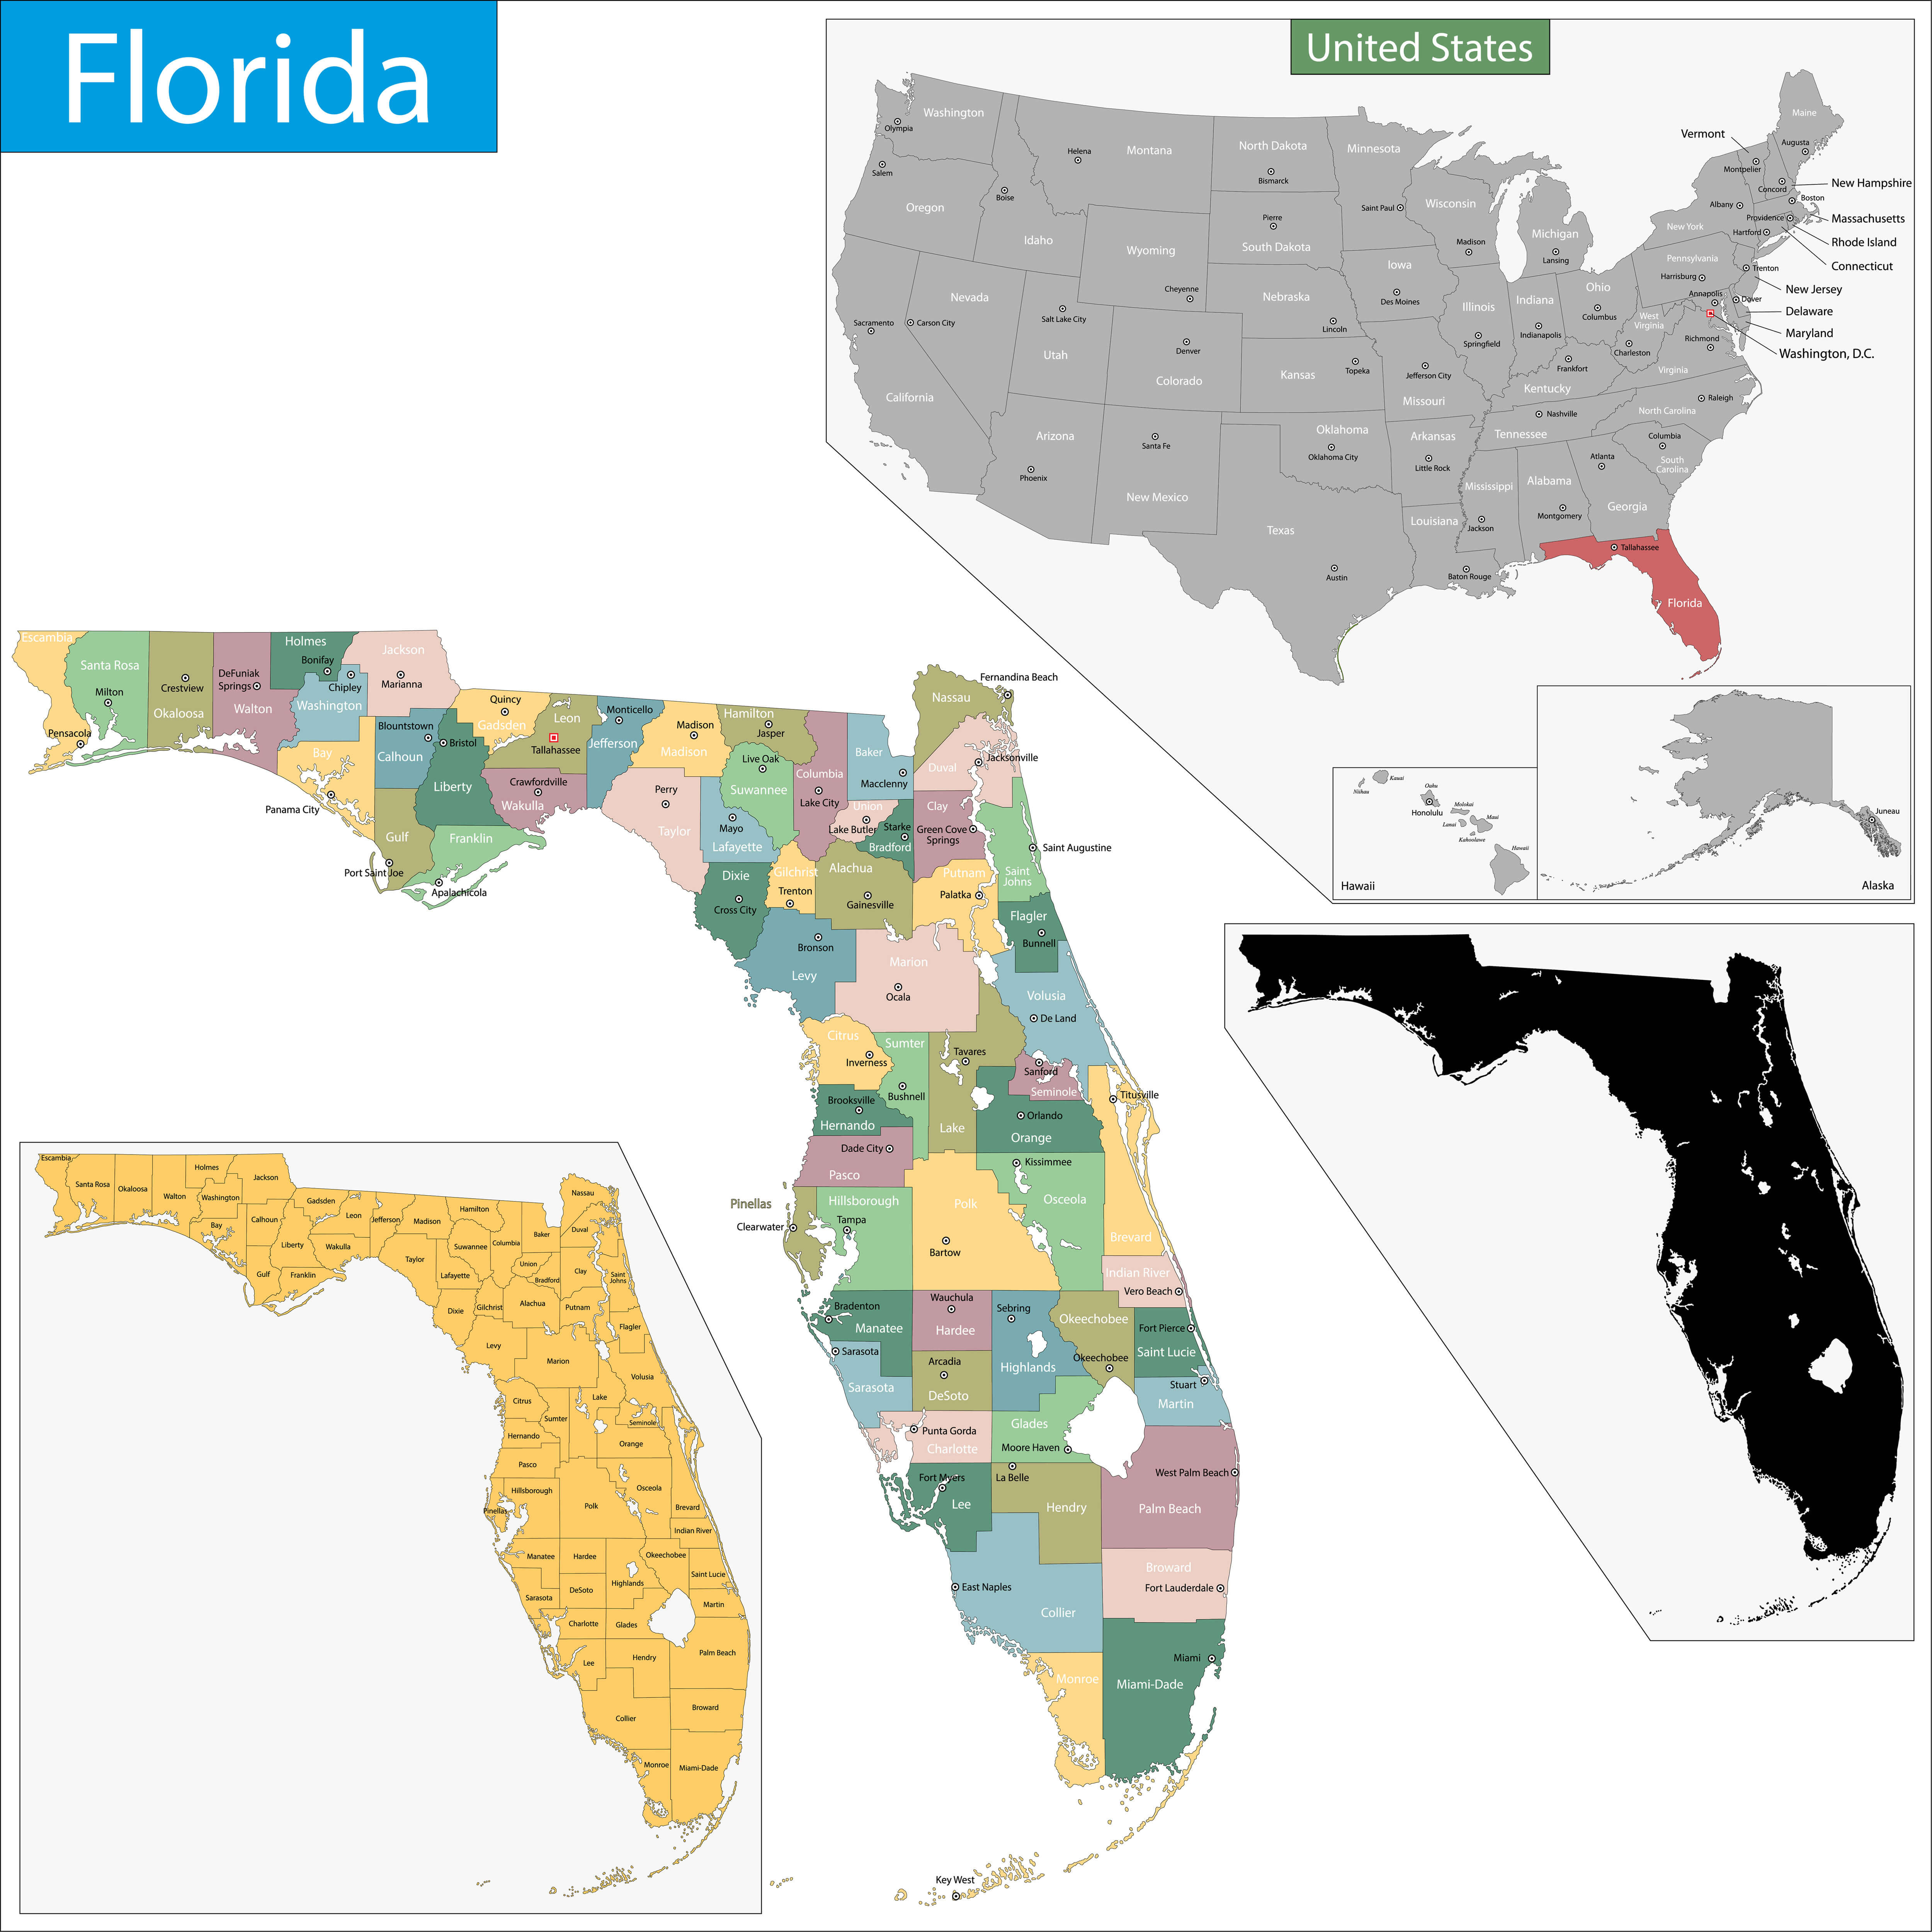 Florida Map with the Counties and US States